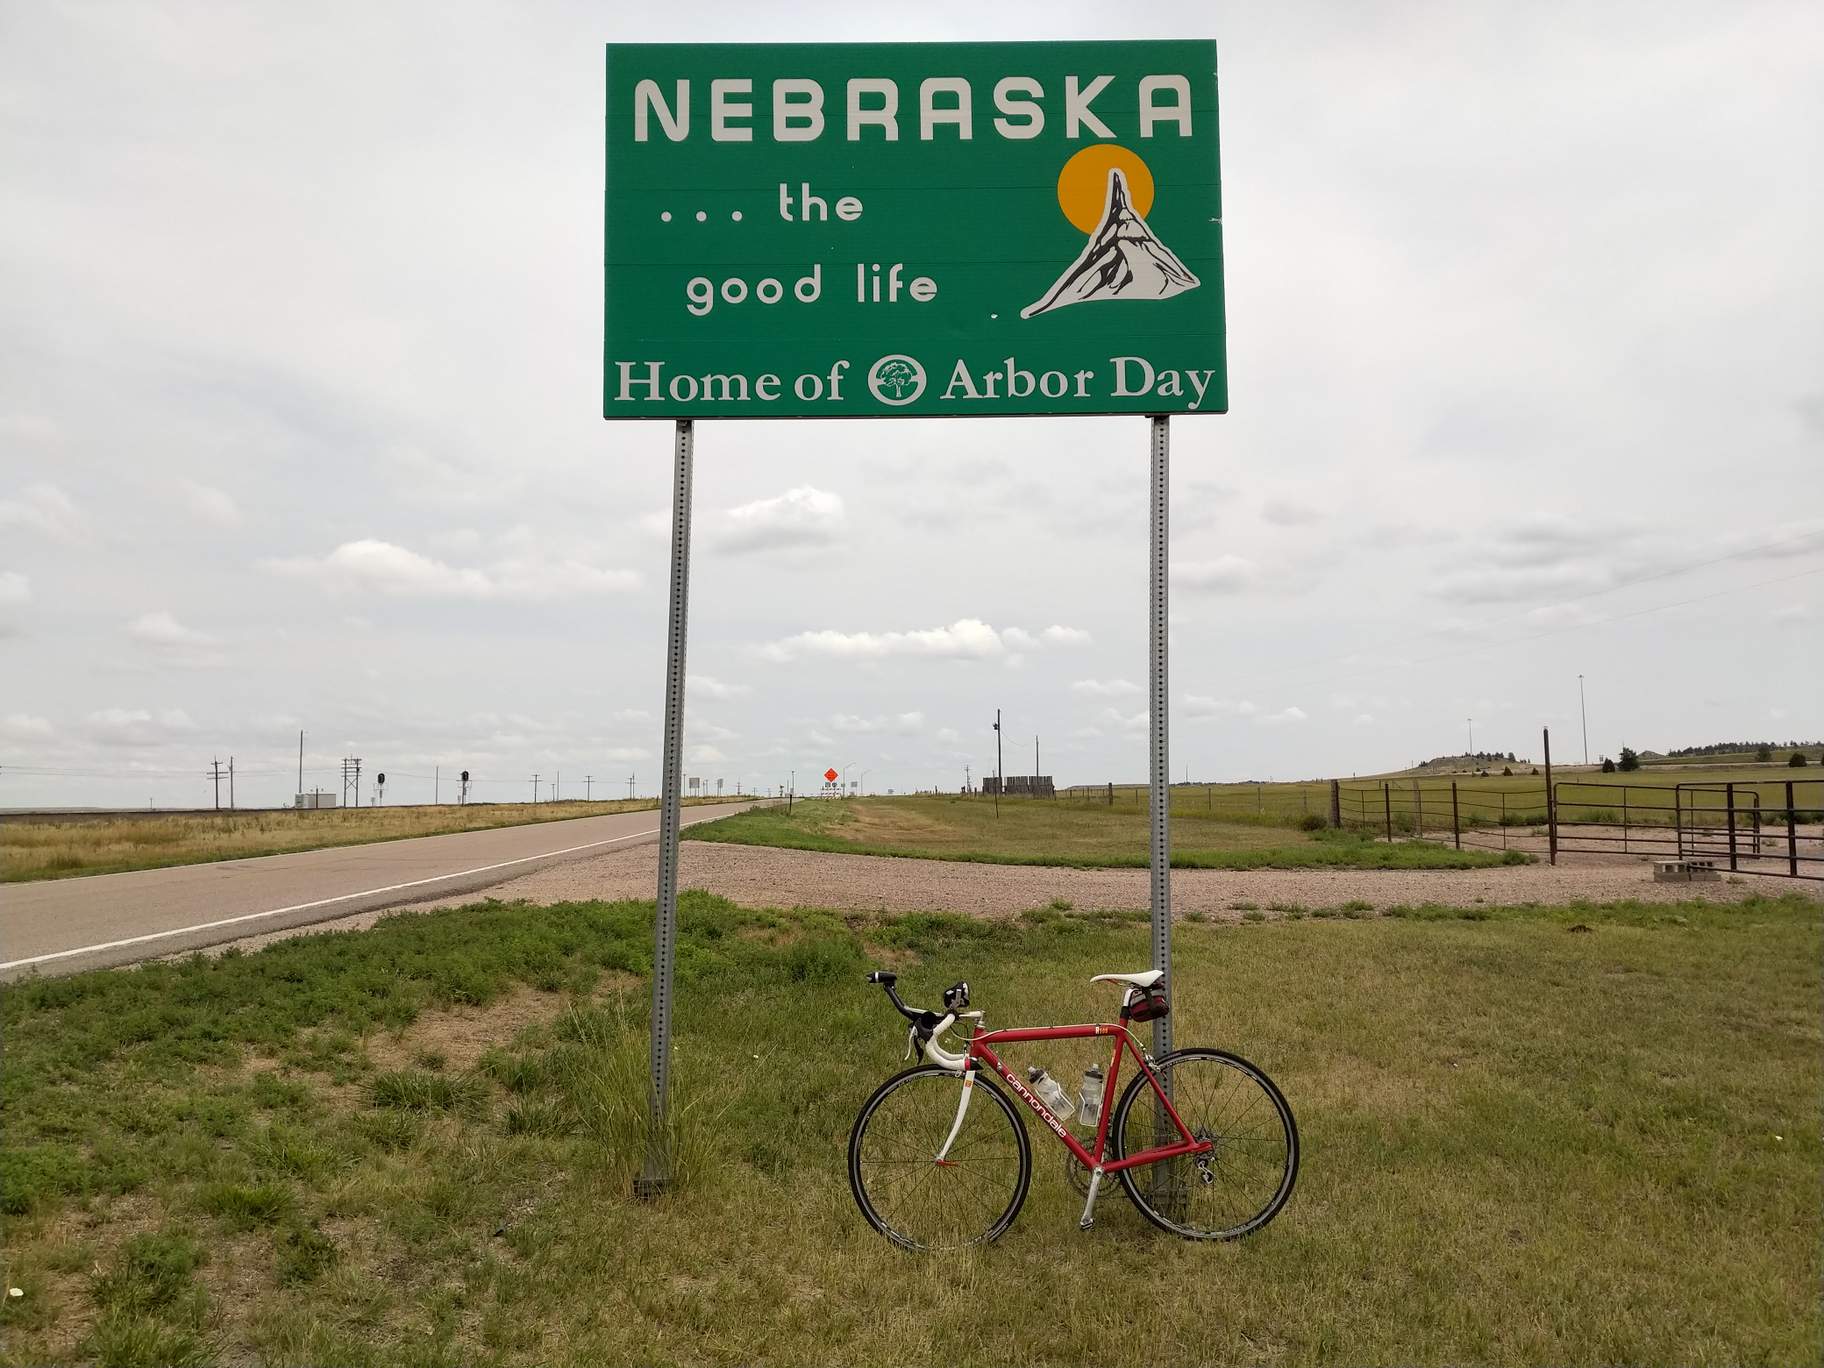 My red 1992 Cannondale 3.0 with the Nebraska state border sign. The irony of the slogan "Home of Arbor Day" was not lost on me in this particular area where there was not a single tree nor bush.